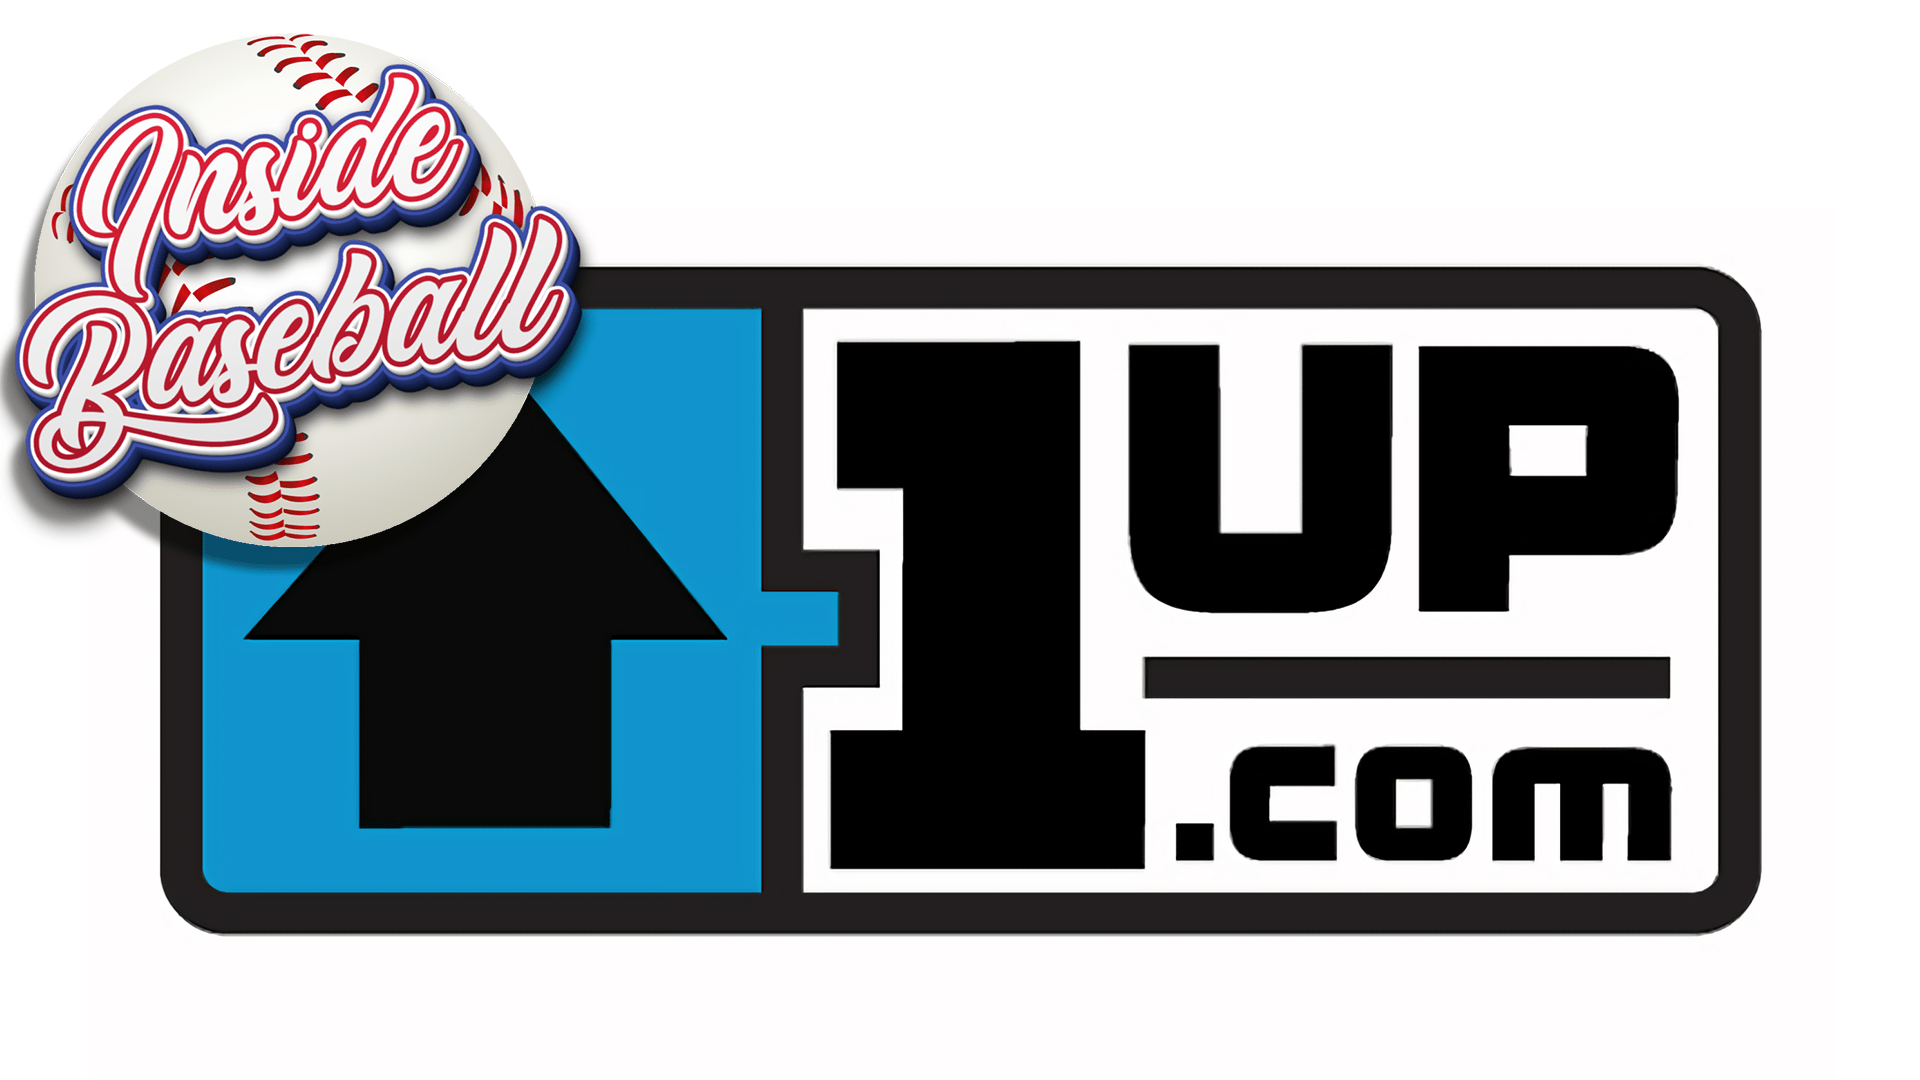 The 1UP.com logo with "Inside Baseball" over it.